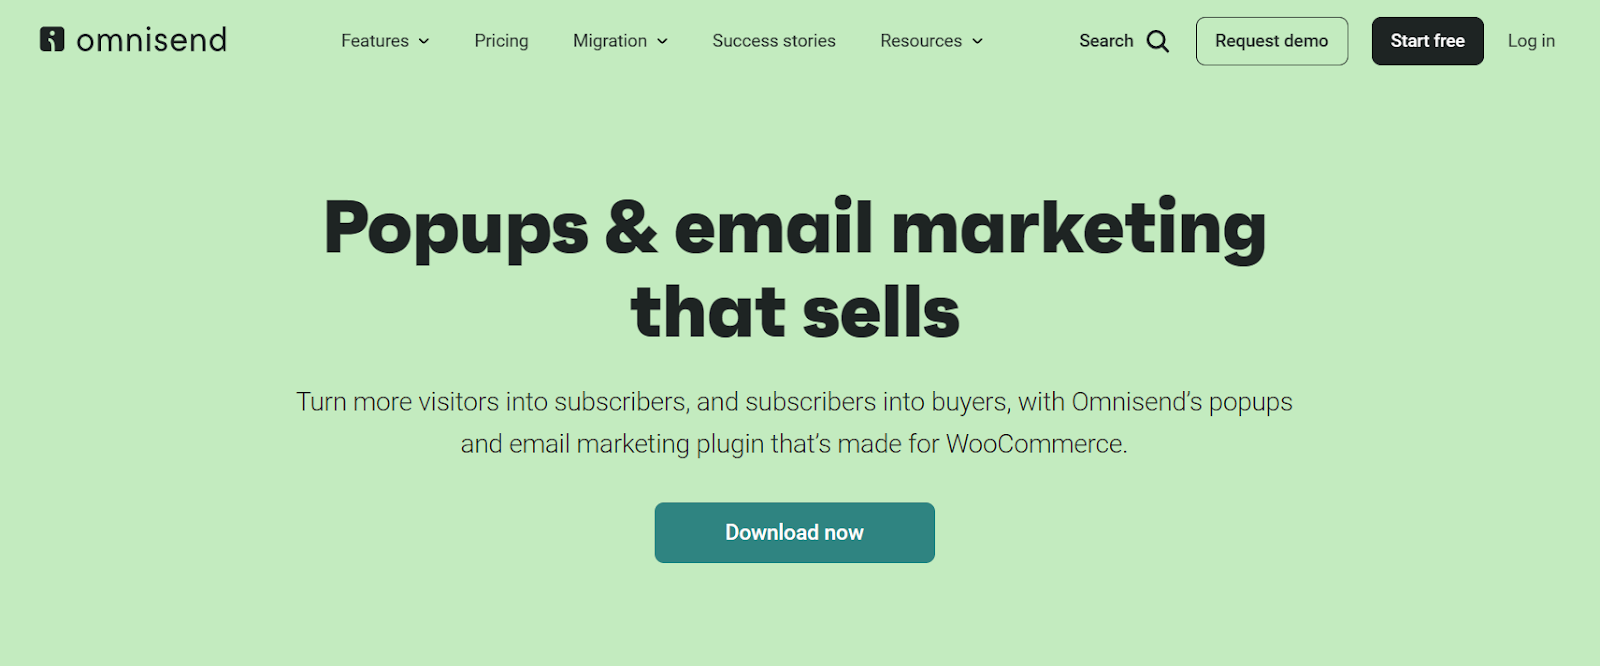 Email Marketing for WooCommerce by Omnisend 